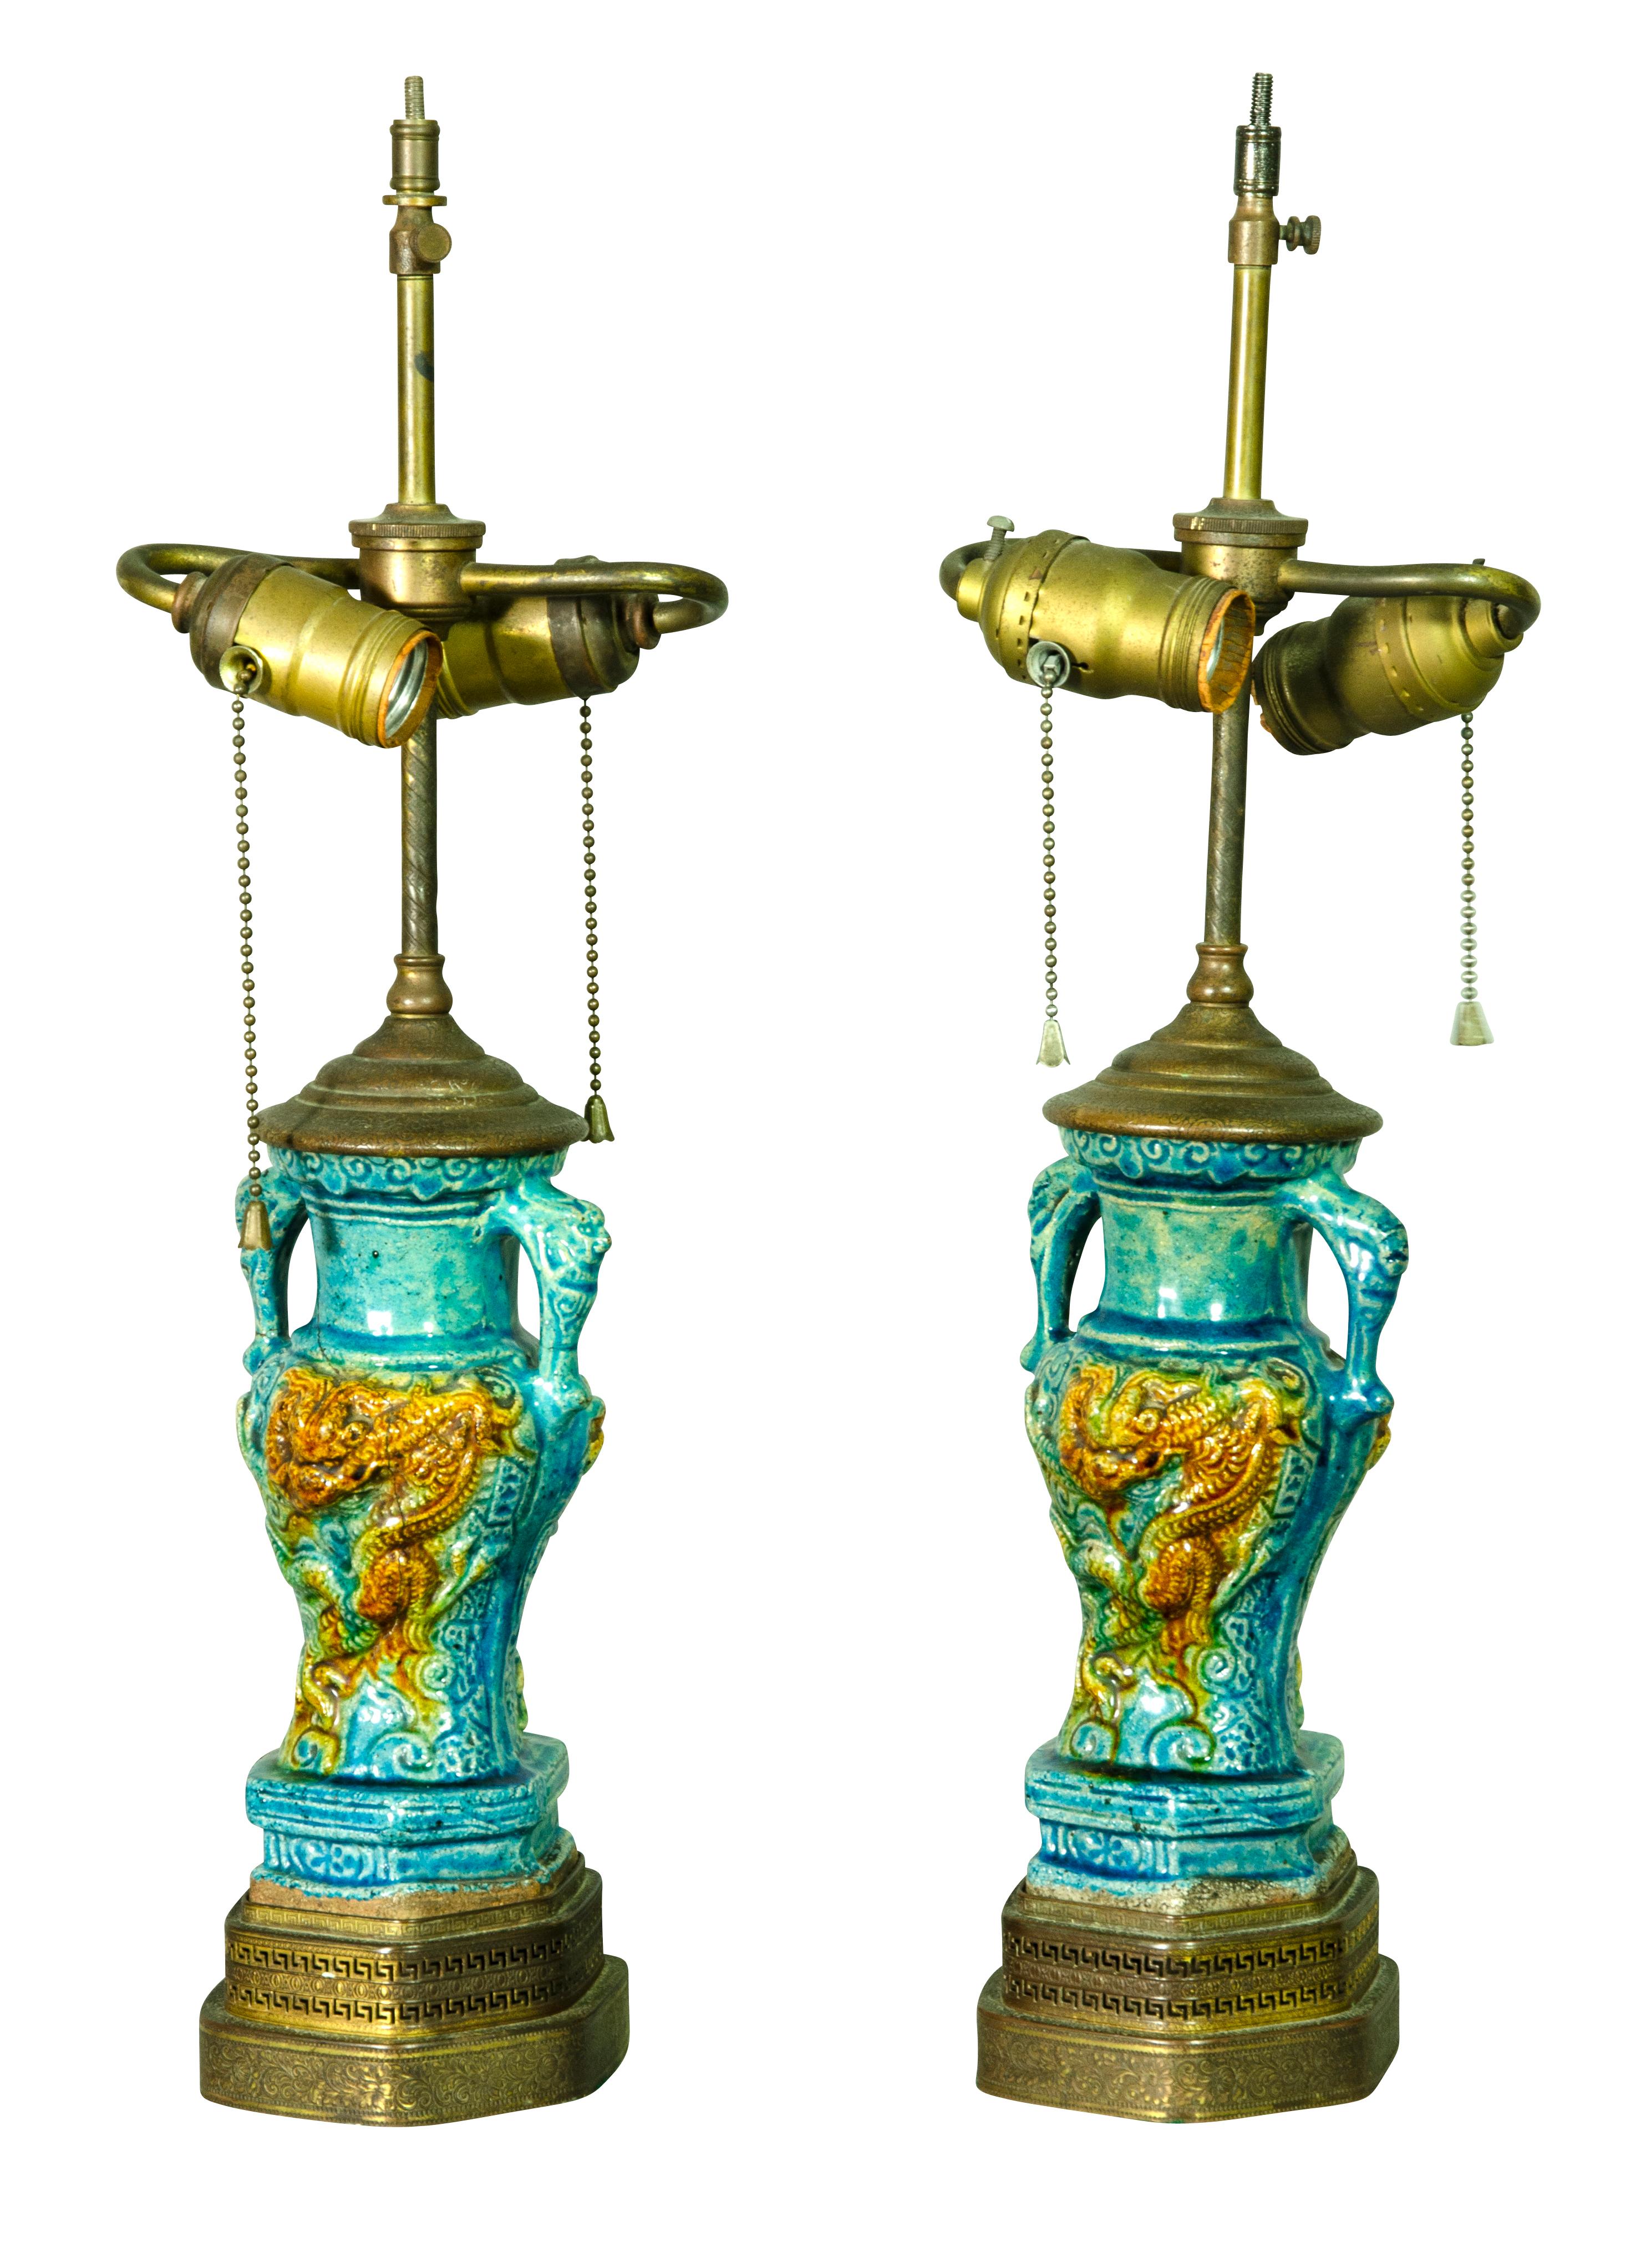 Two handle vases with central dragon relief decoration. Overall turquoise glaze. Gilt metal bases.